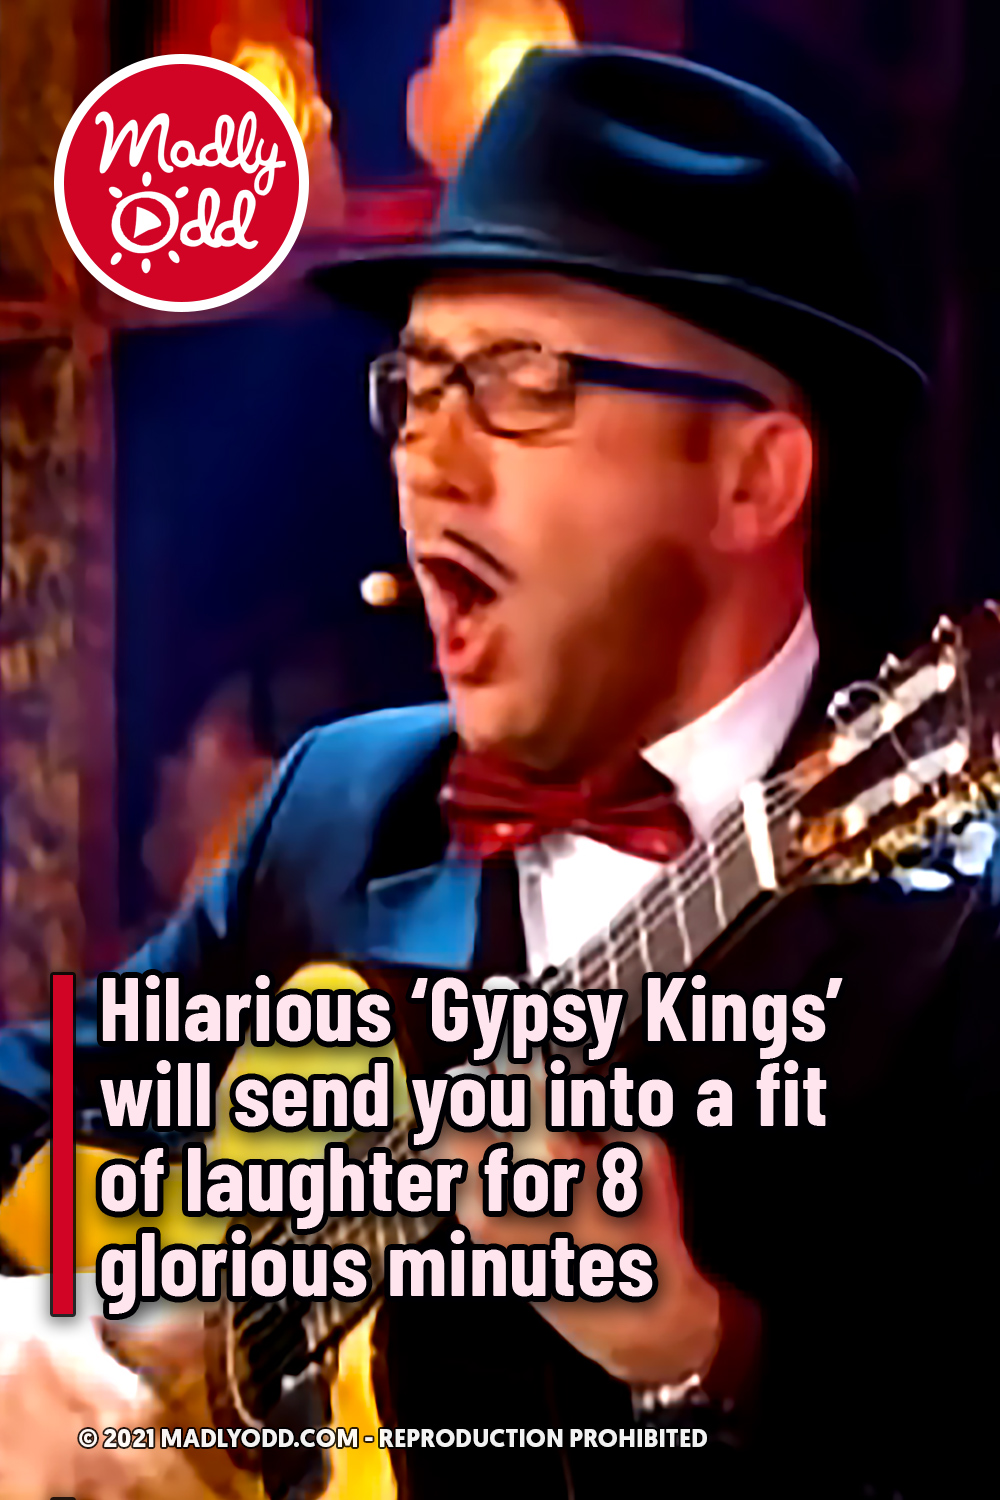 Hilarious ‘Gypsy Kings’ will send you into a fit of laughter for 8 glorious minutes